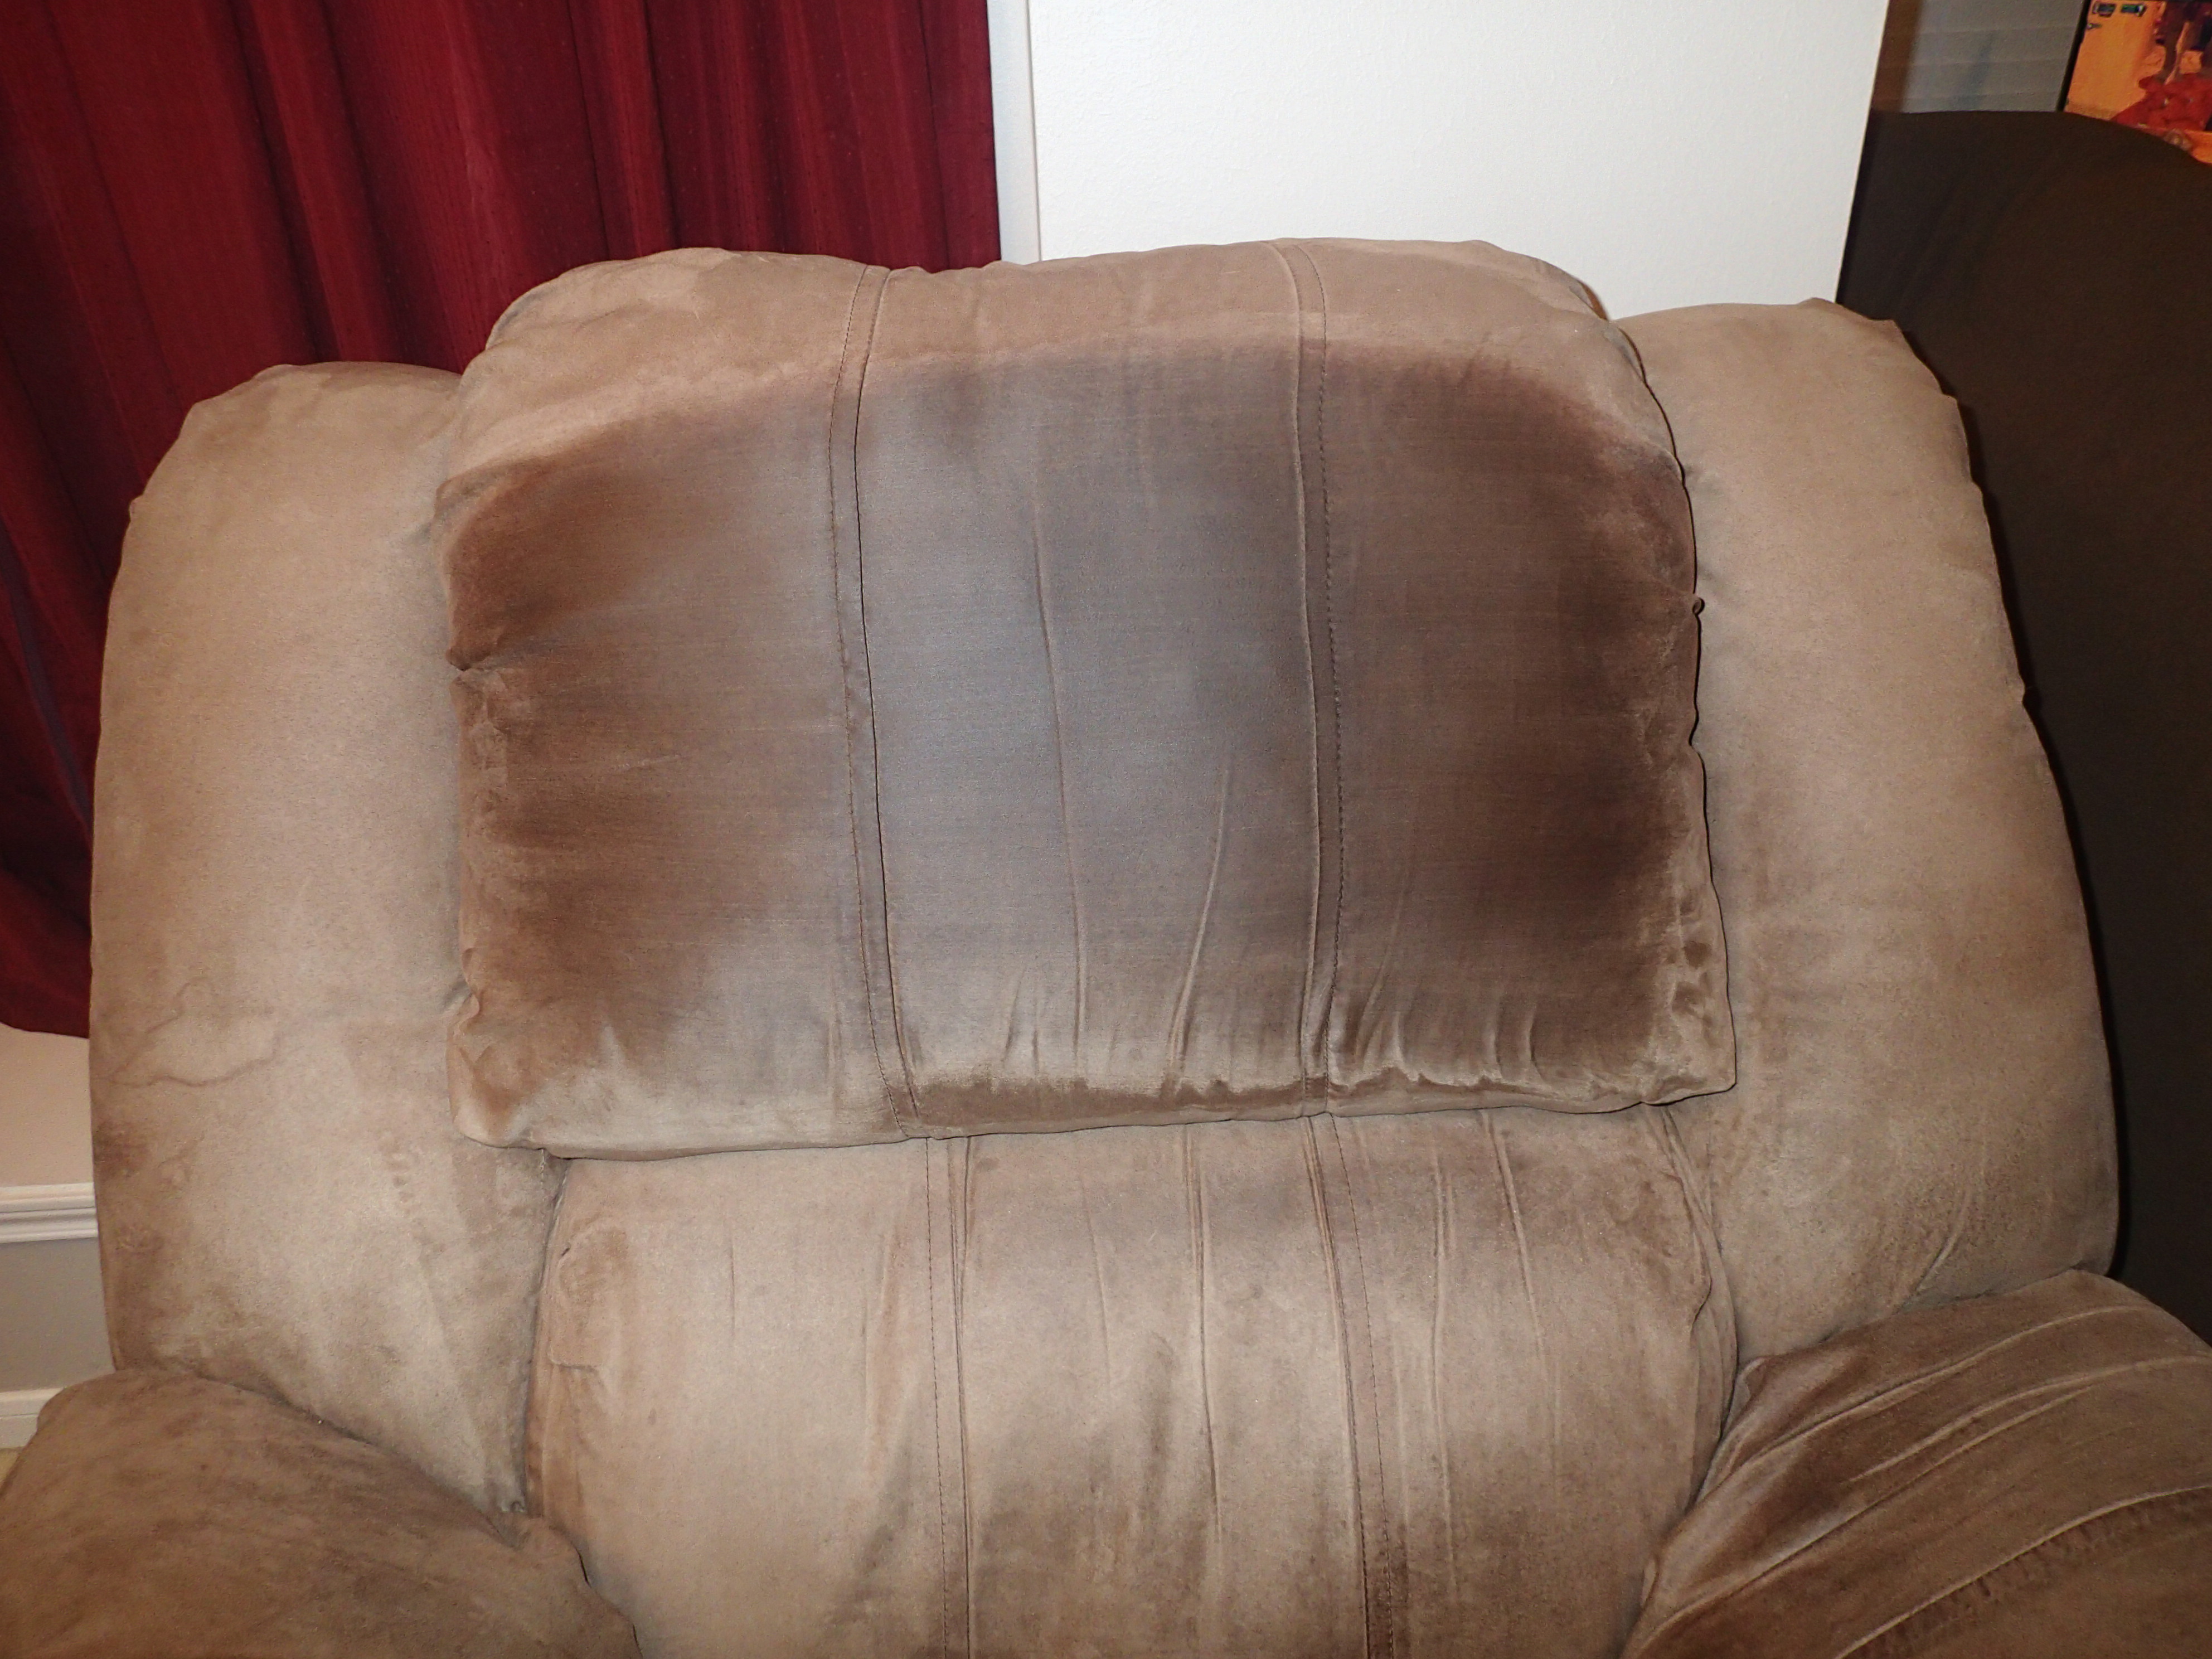 How to Clean a Microfiber Couch - Page 5 of 7 - Wrapped in Rust